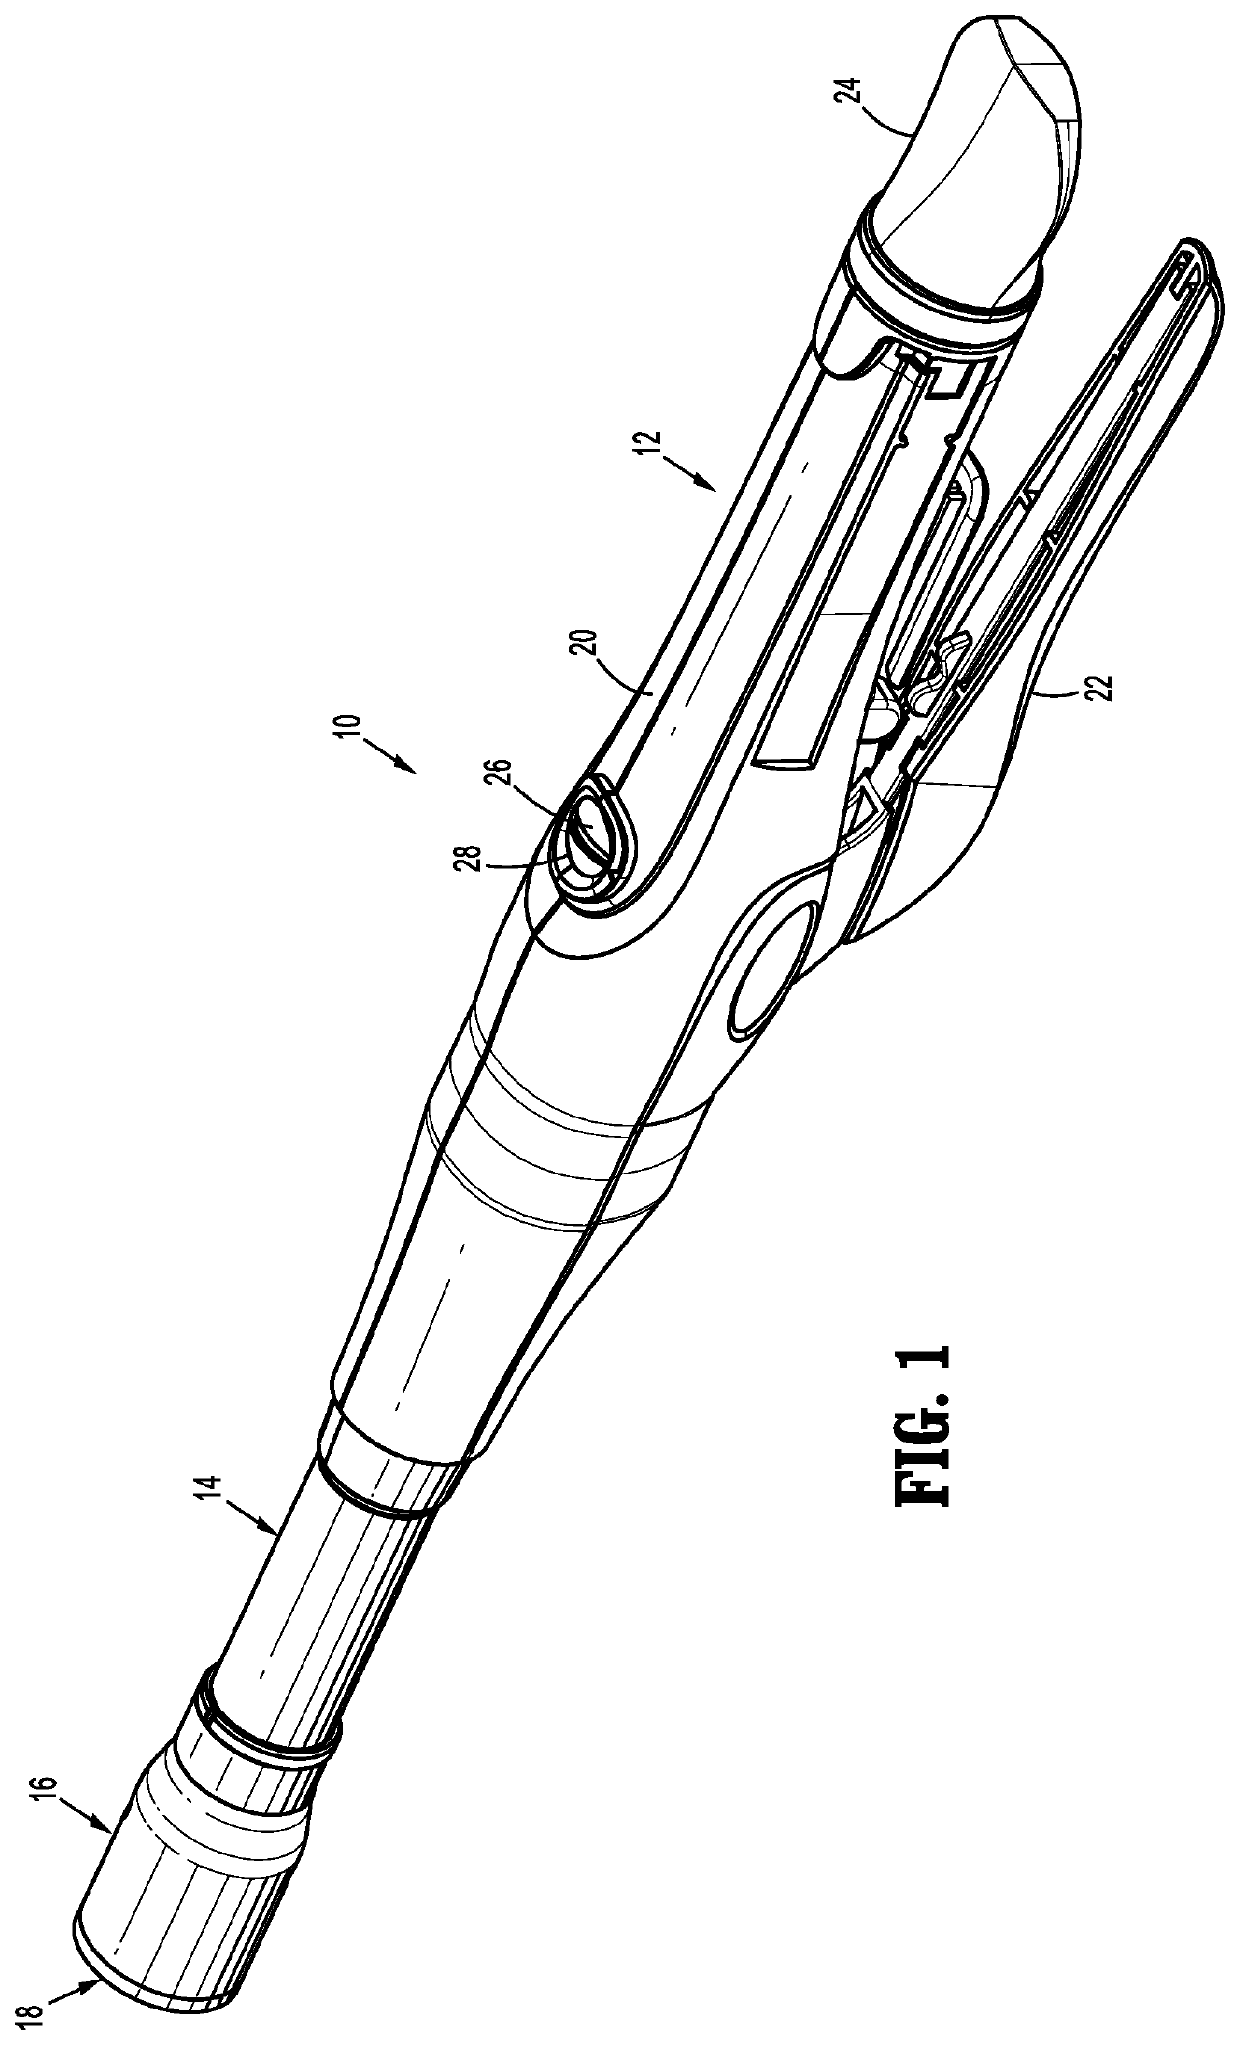 Surgical stapling device with firing indicator